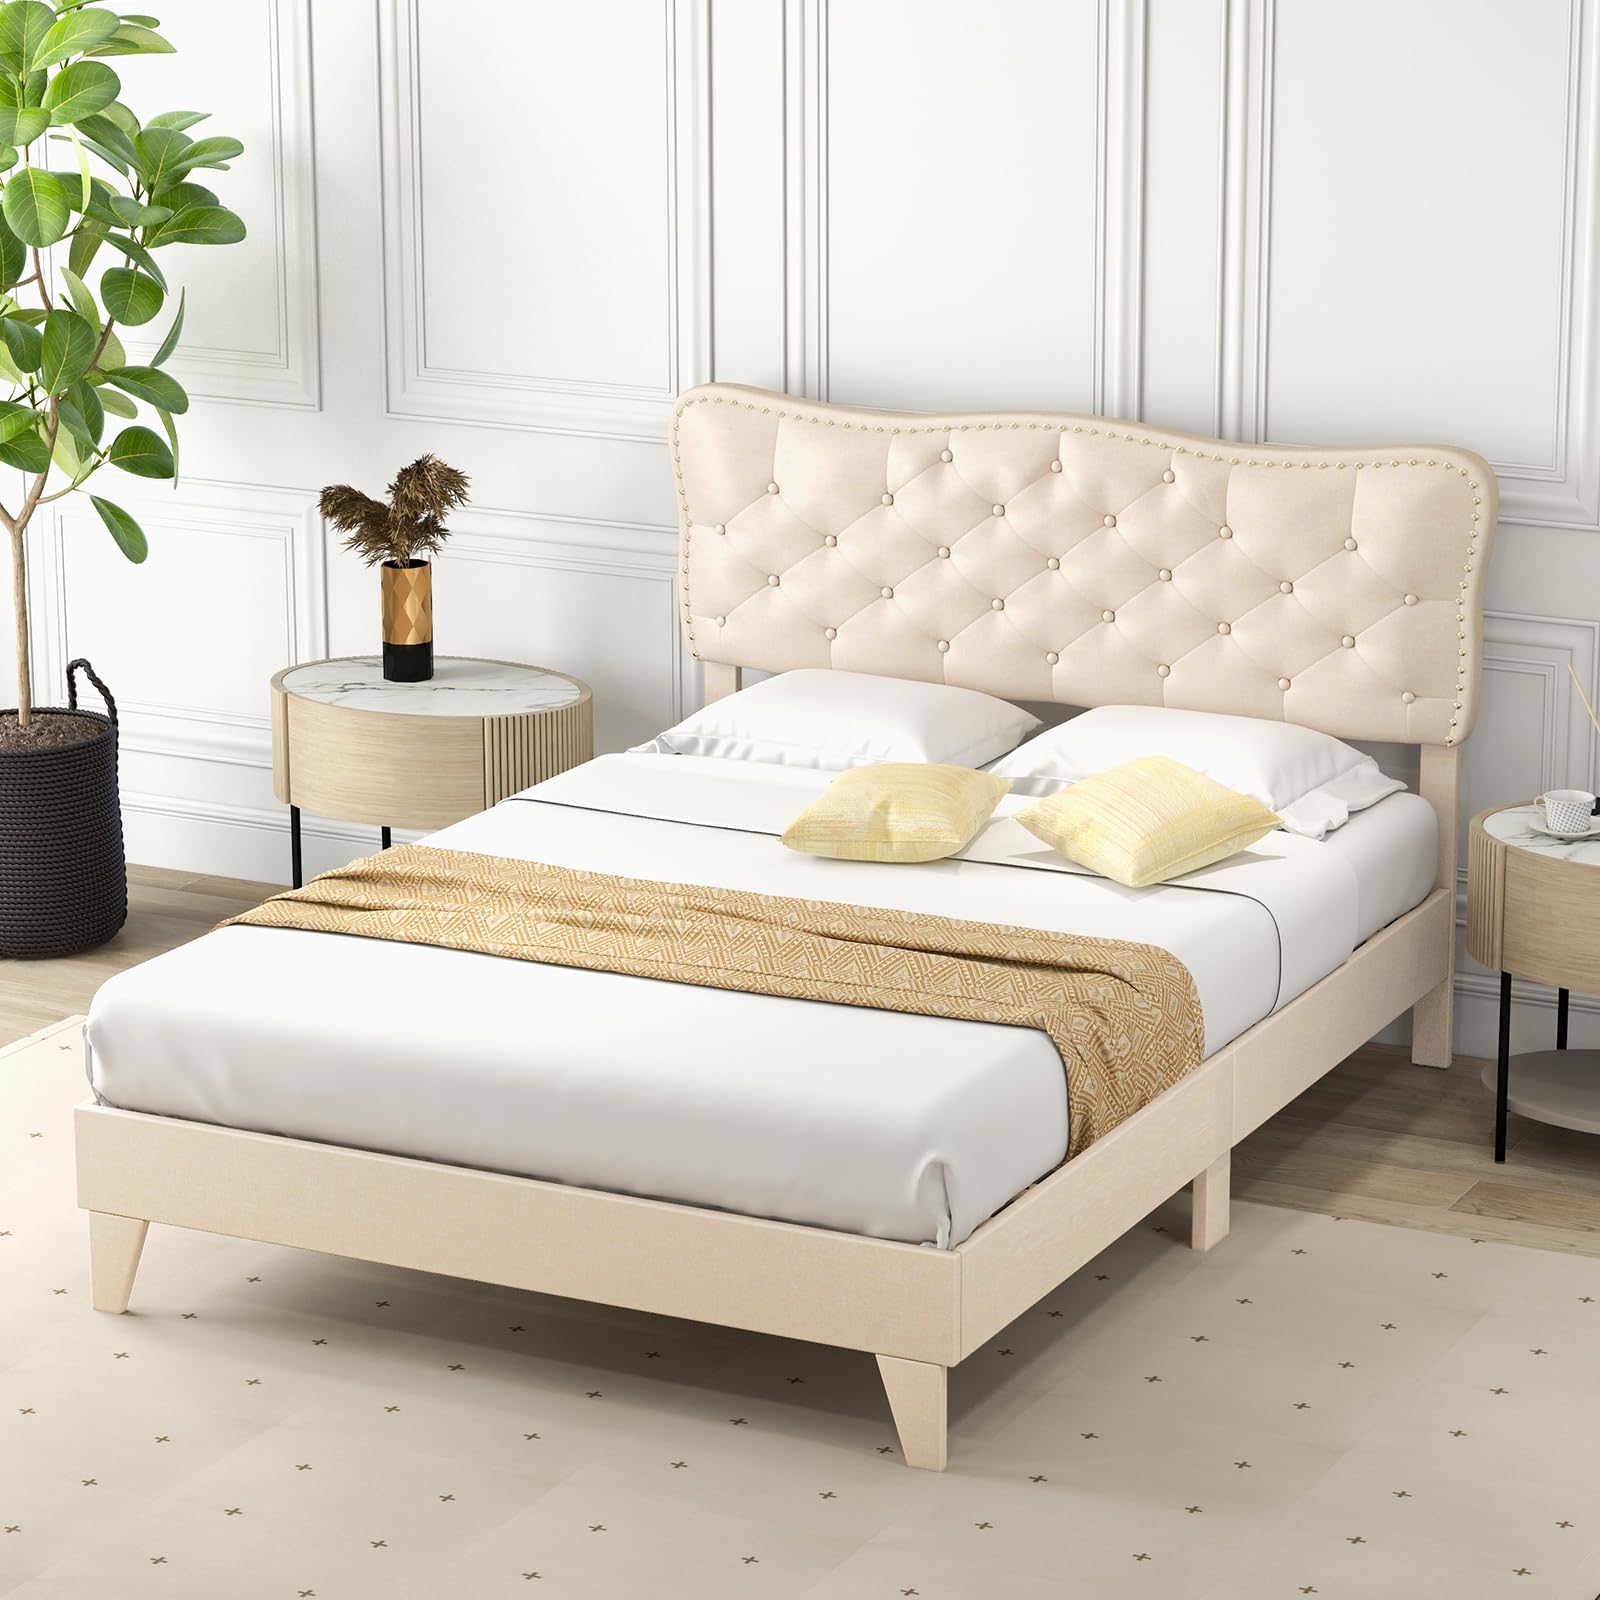 Giantex Full Size Bed Frame Beige, Linen Fabric Upholstered Platform Bed Frame with Nail Headboard